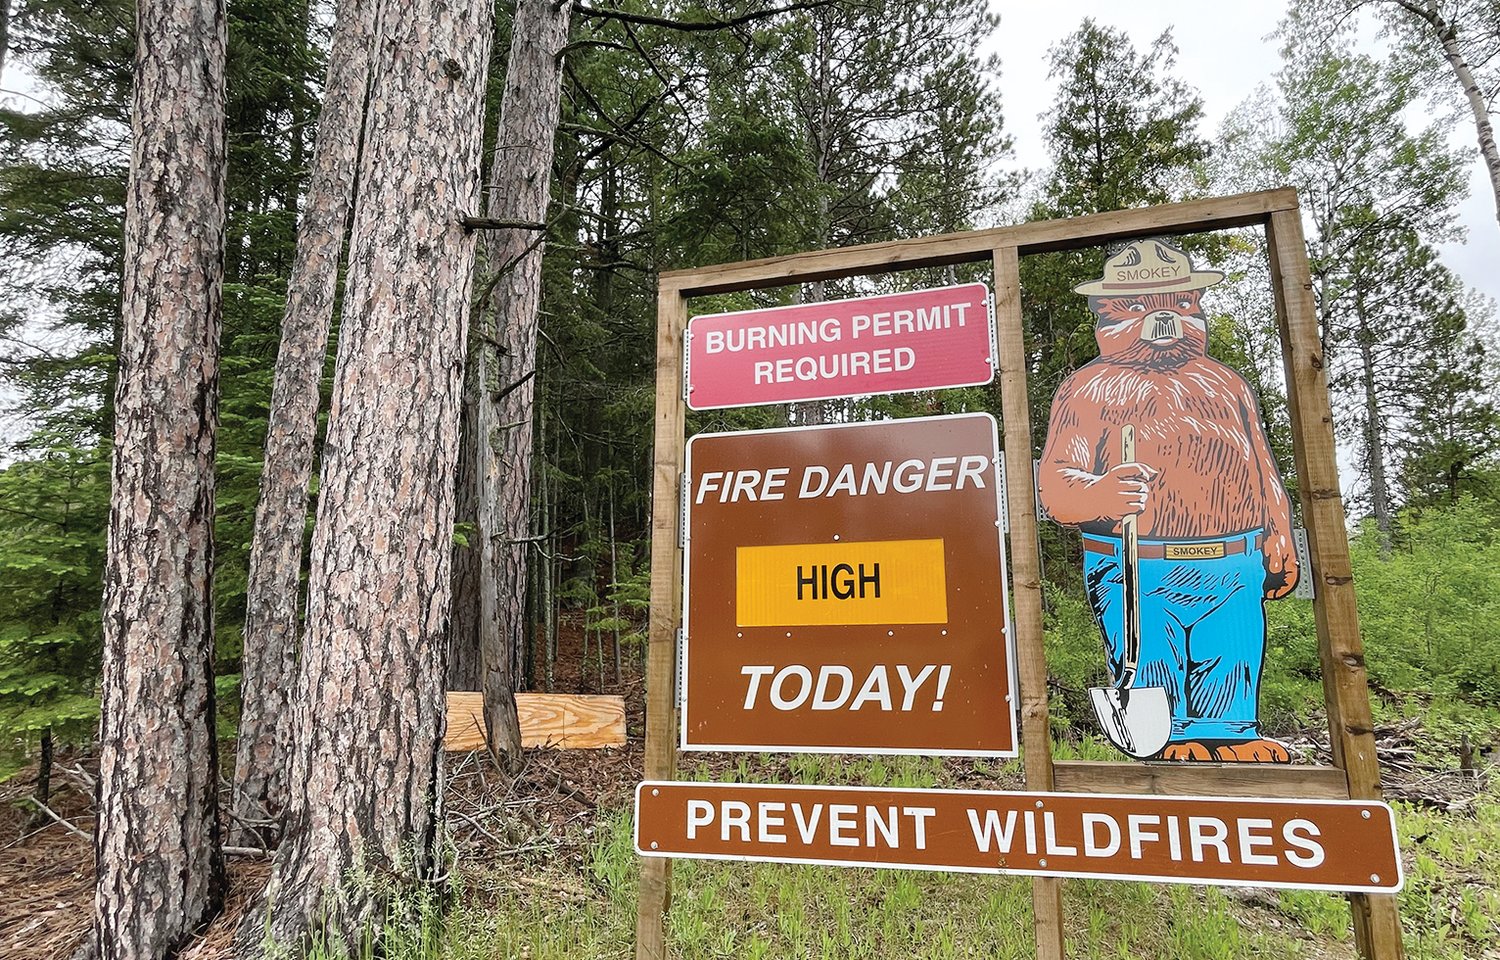 Two weeks with little rain has pushed the fire danger to high in the DNR’s Tower area. The area continues to experience wild swings in weather conditions.